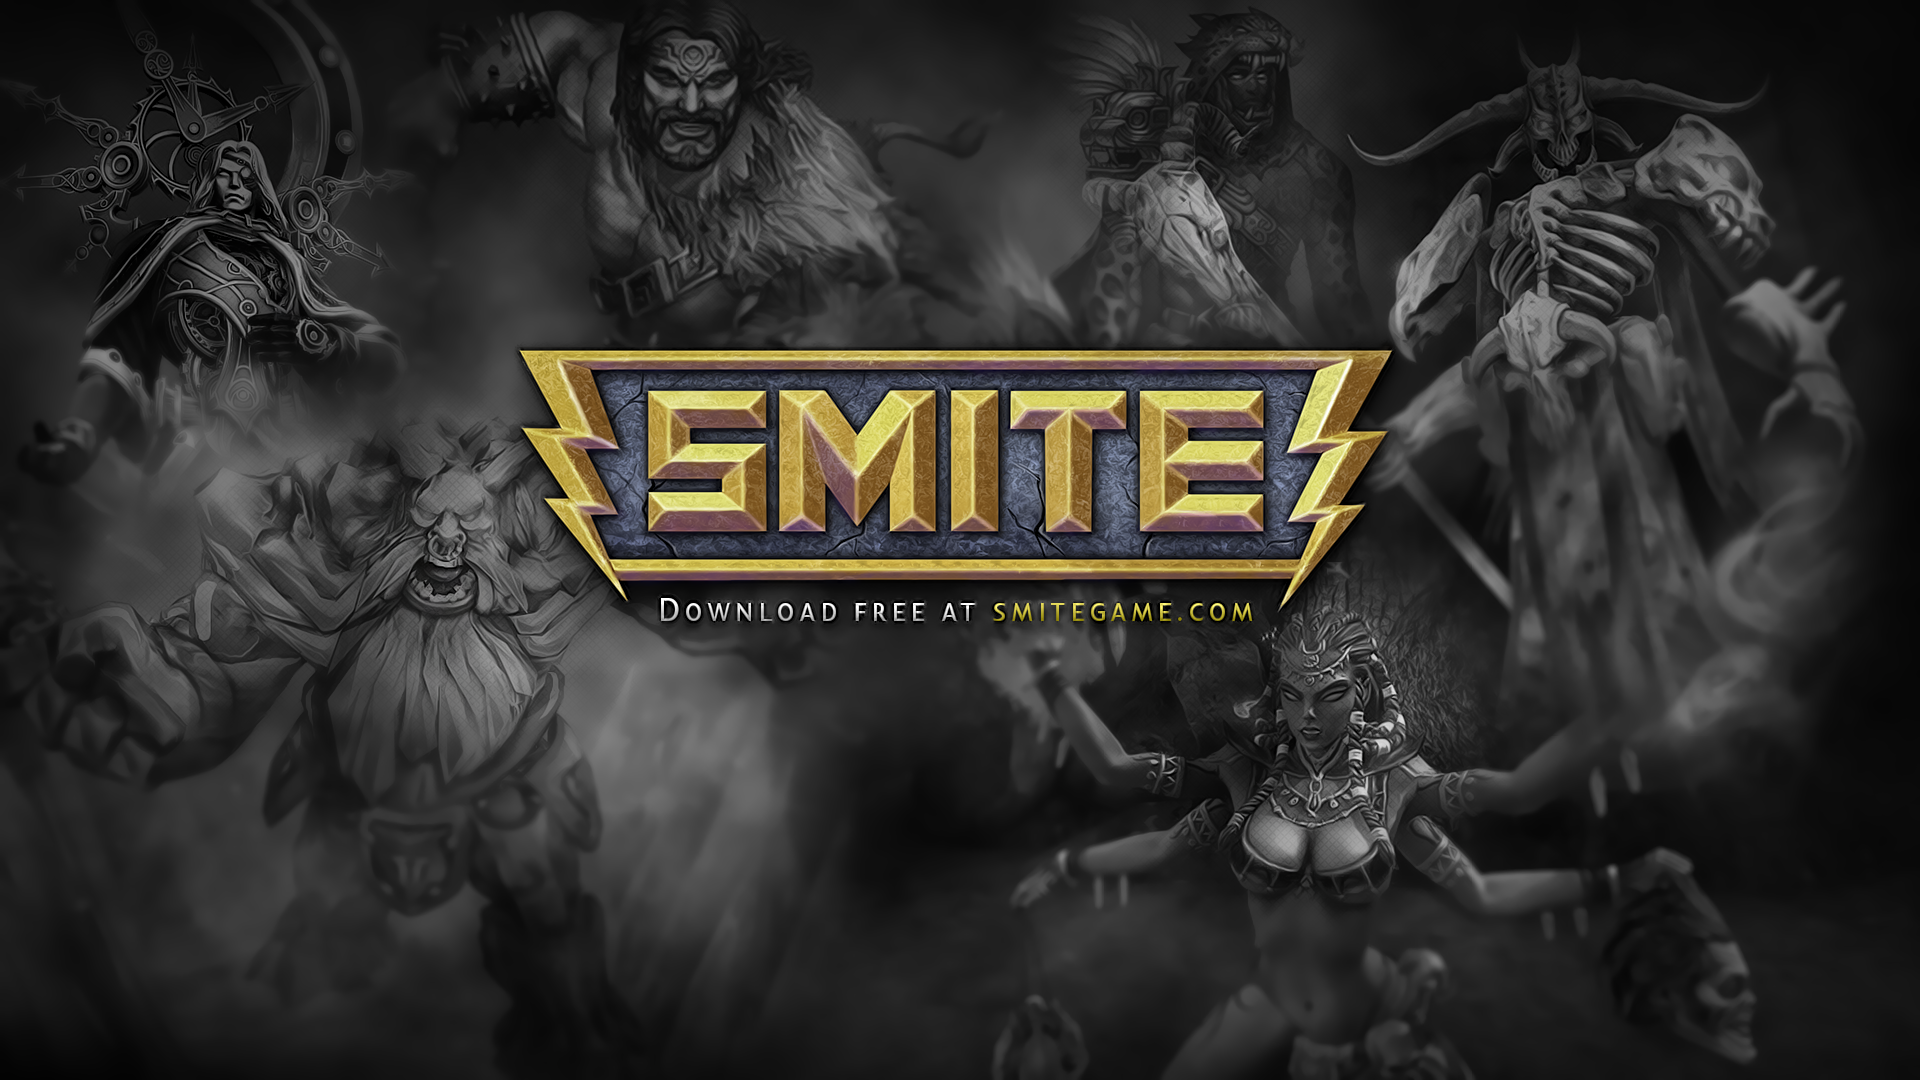 Smite concept art 1920x1080 wallpaper by ACGFX on